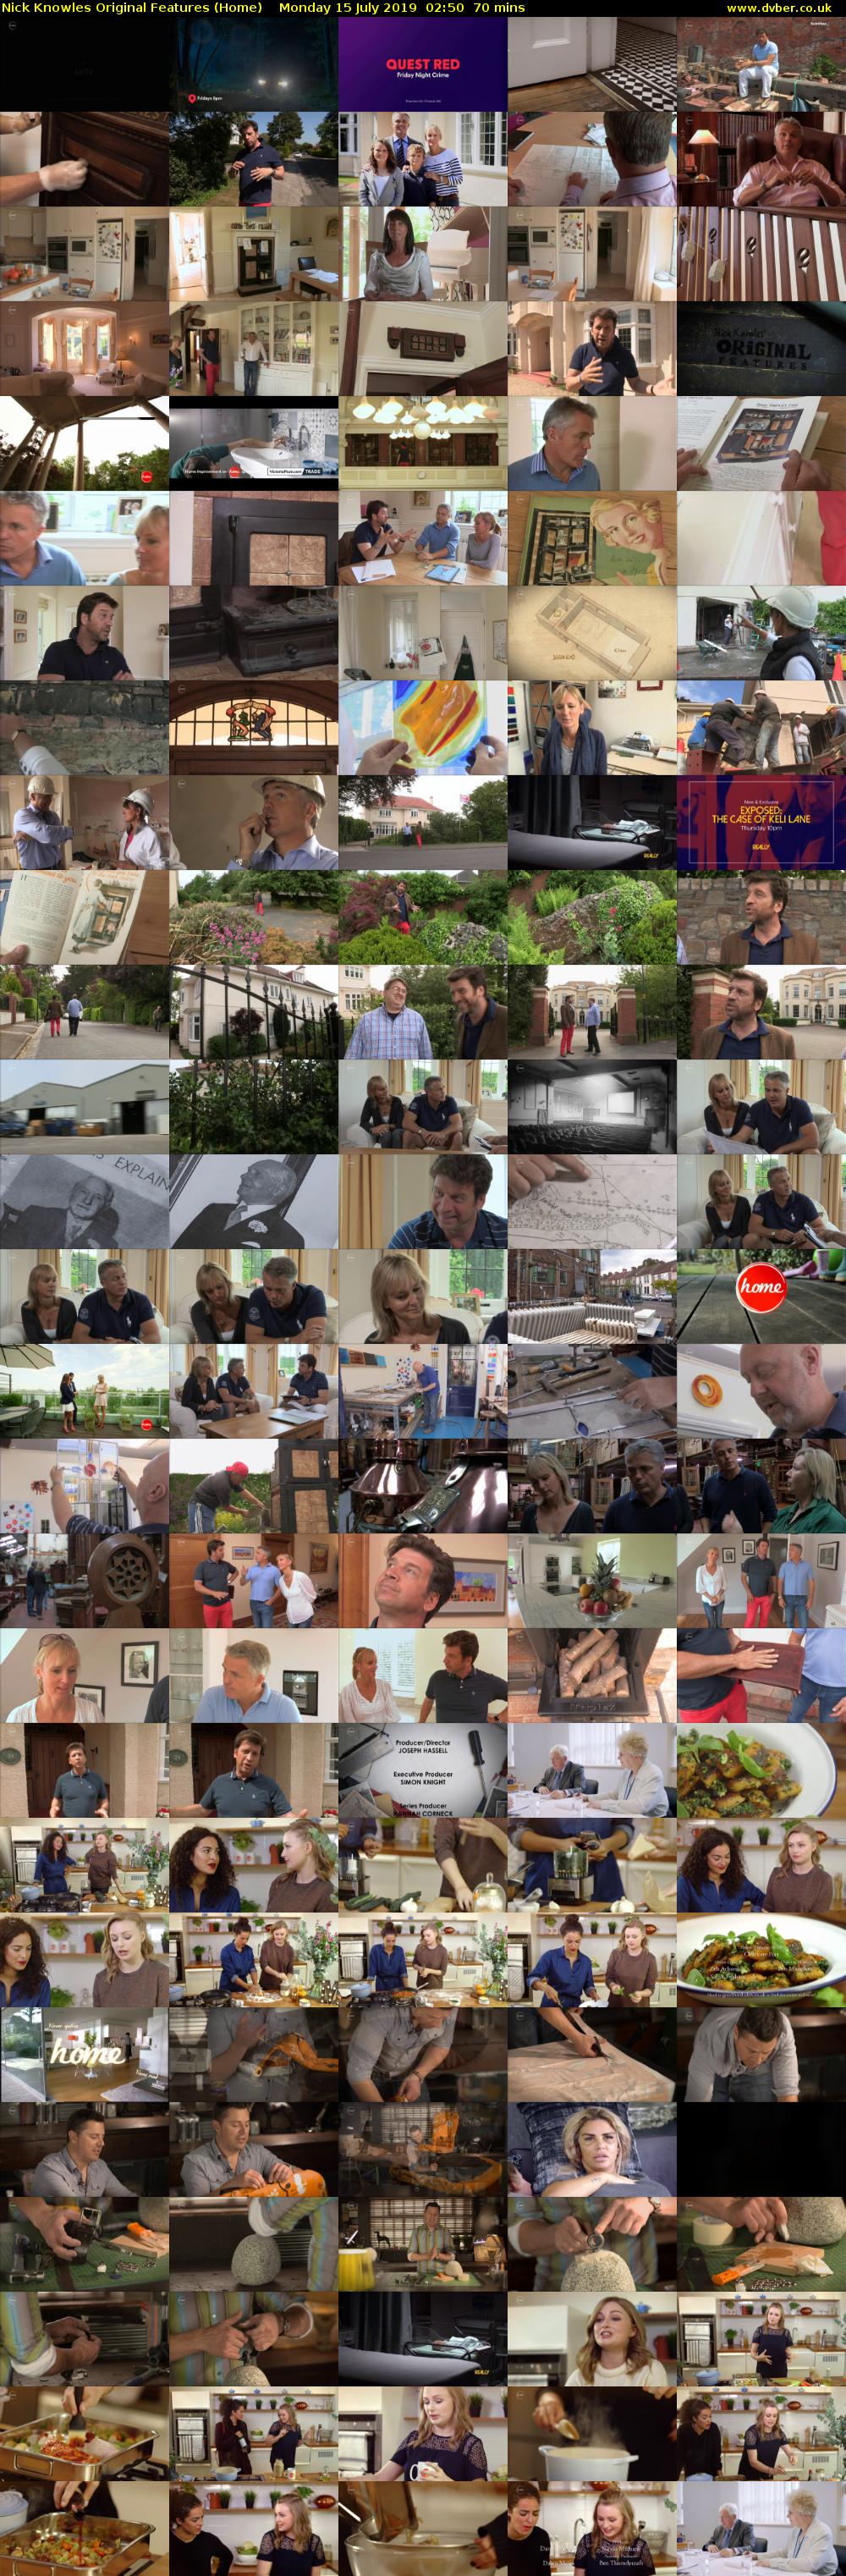 Nick Knowles Original Features (Home) Monday 15 July 2019 02:50 - 04:00